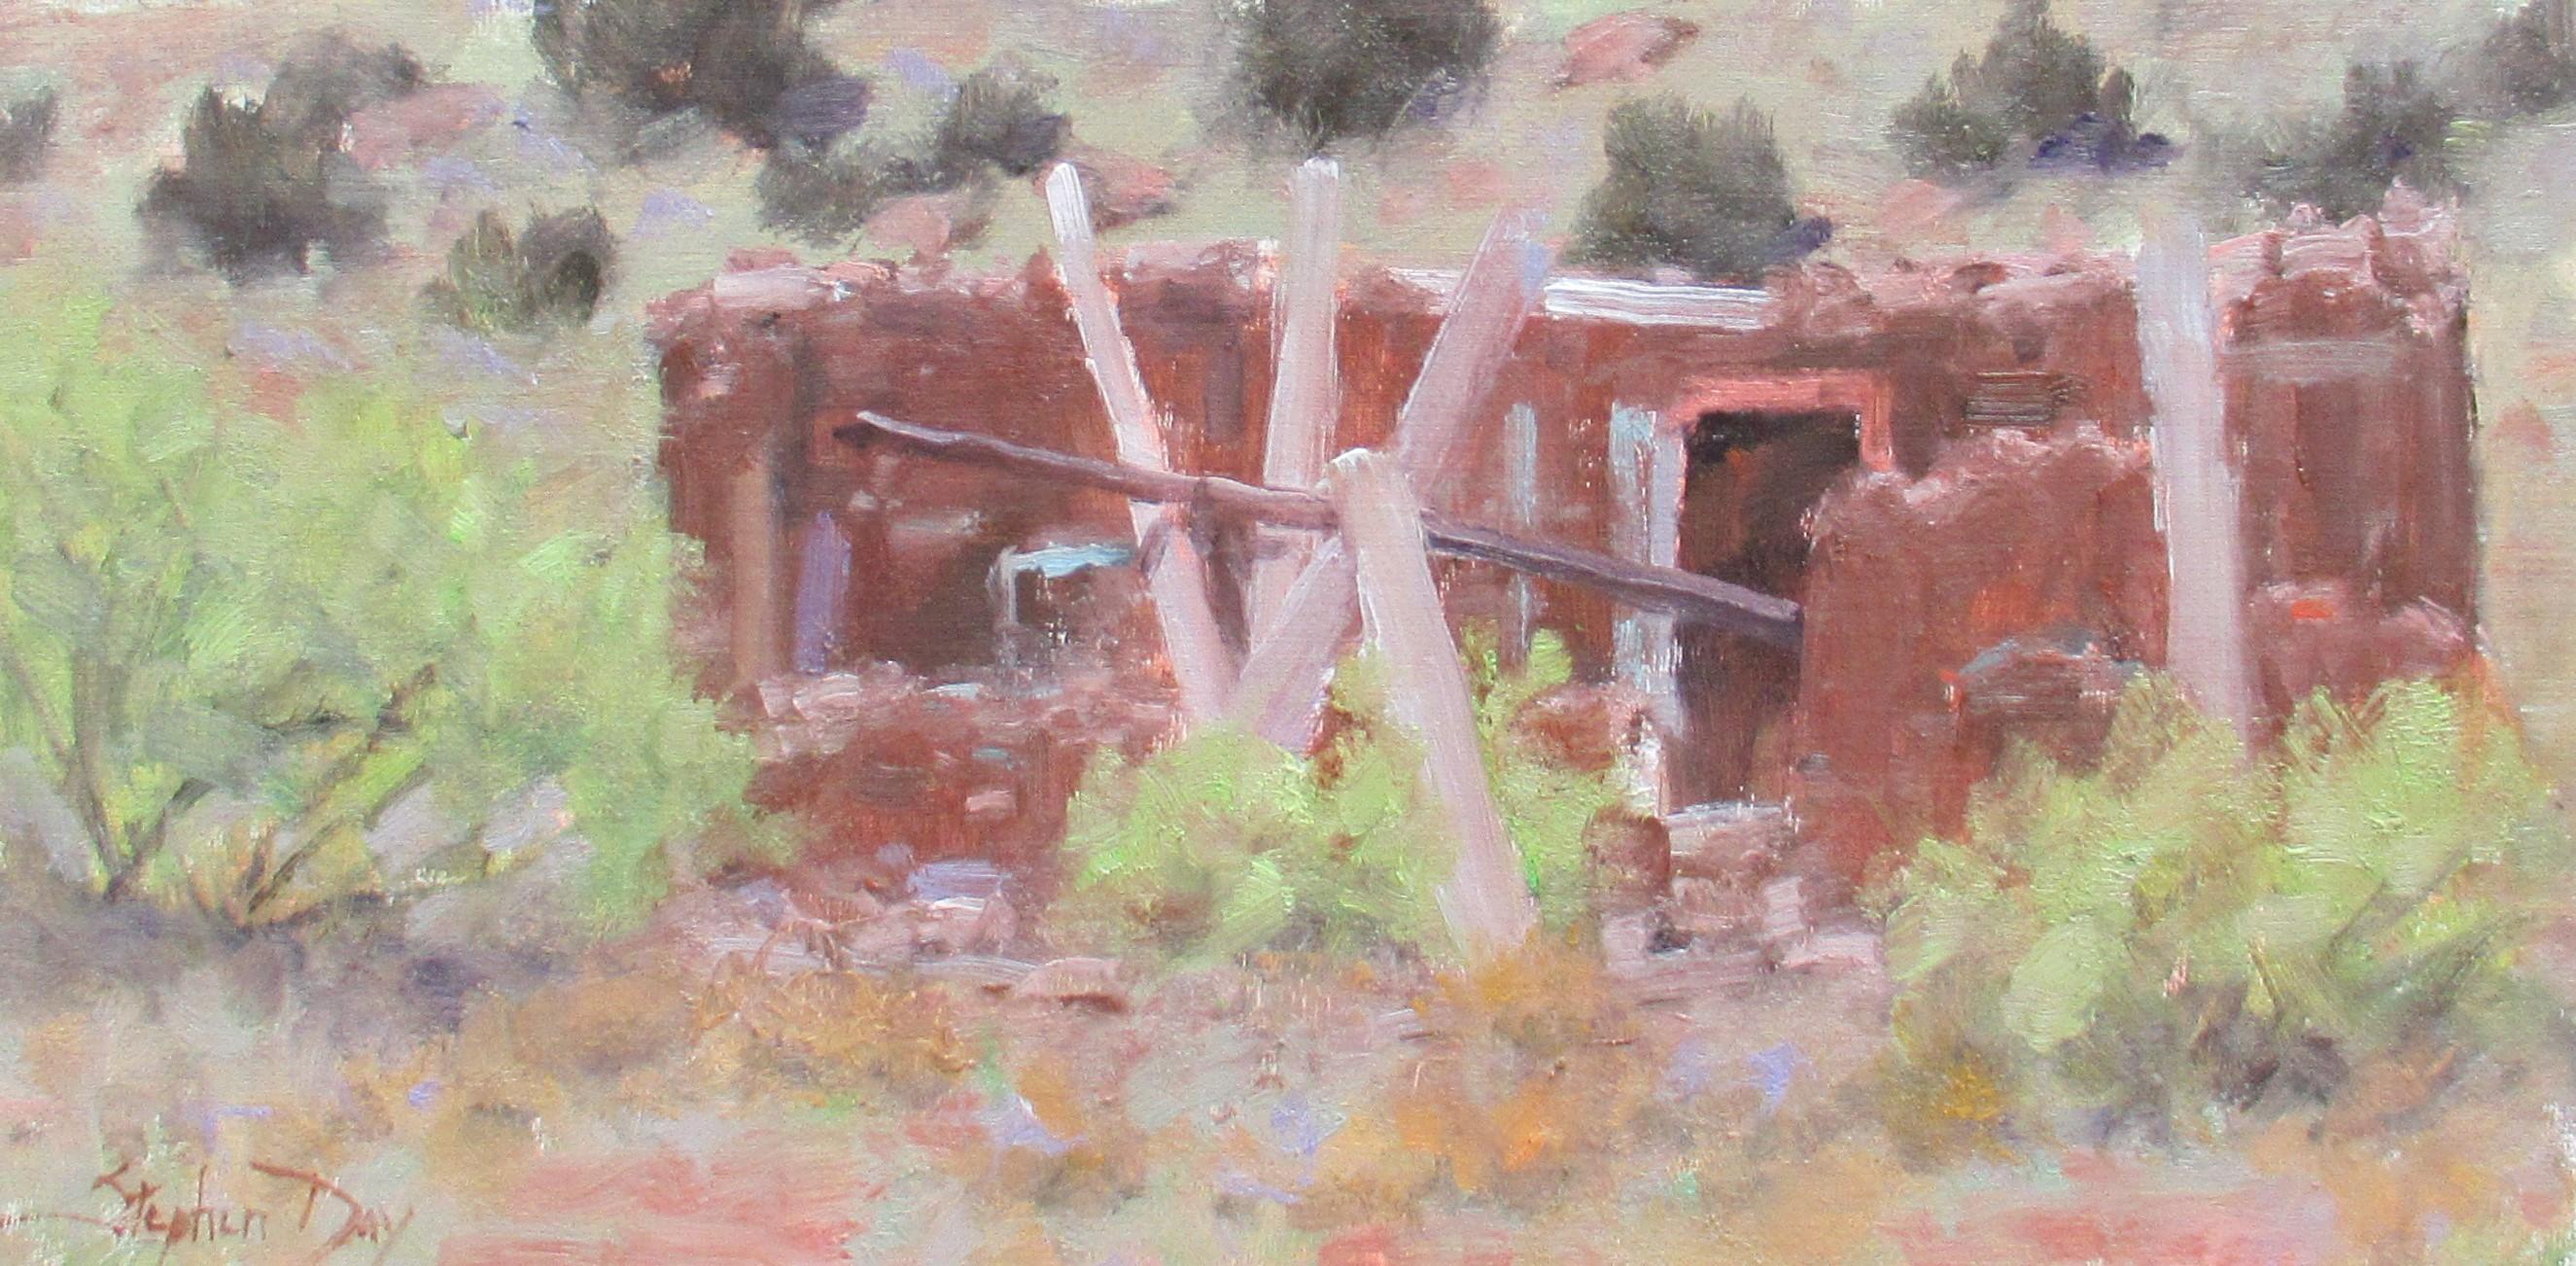 Stephen Day Figurative Painting - "Adobe Ruin - New Mexico" Oil Painting